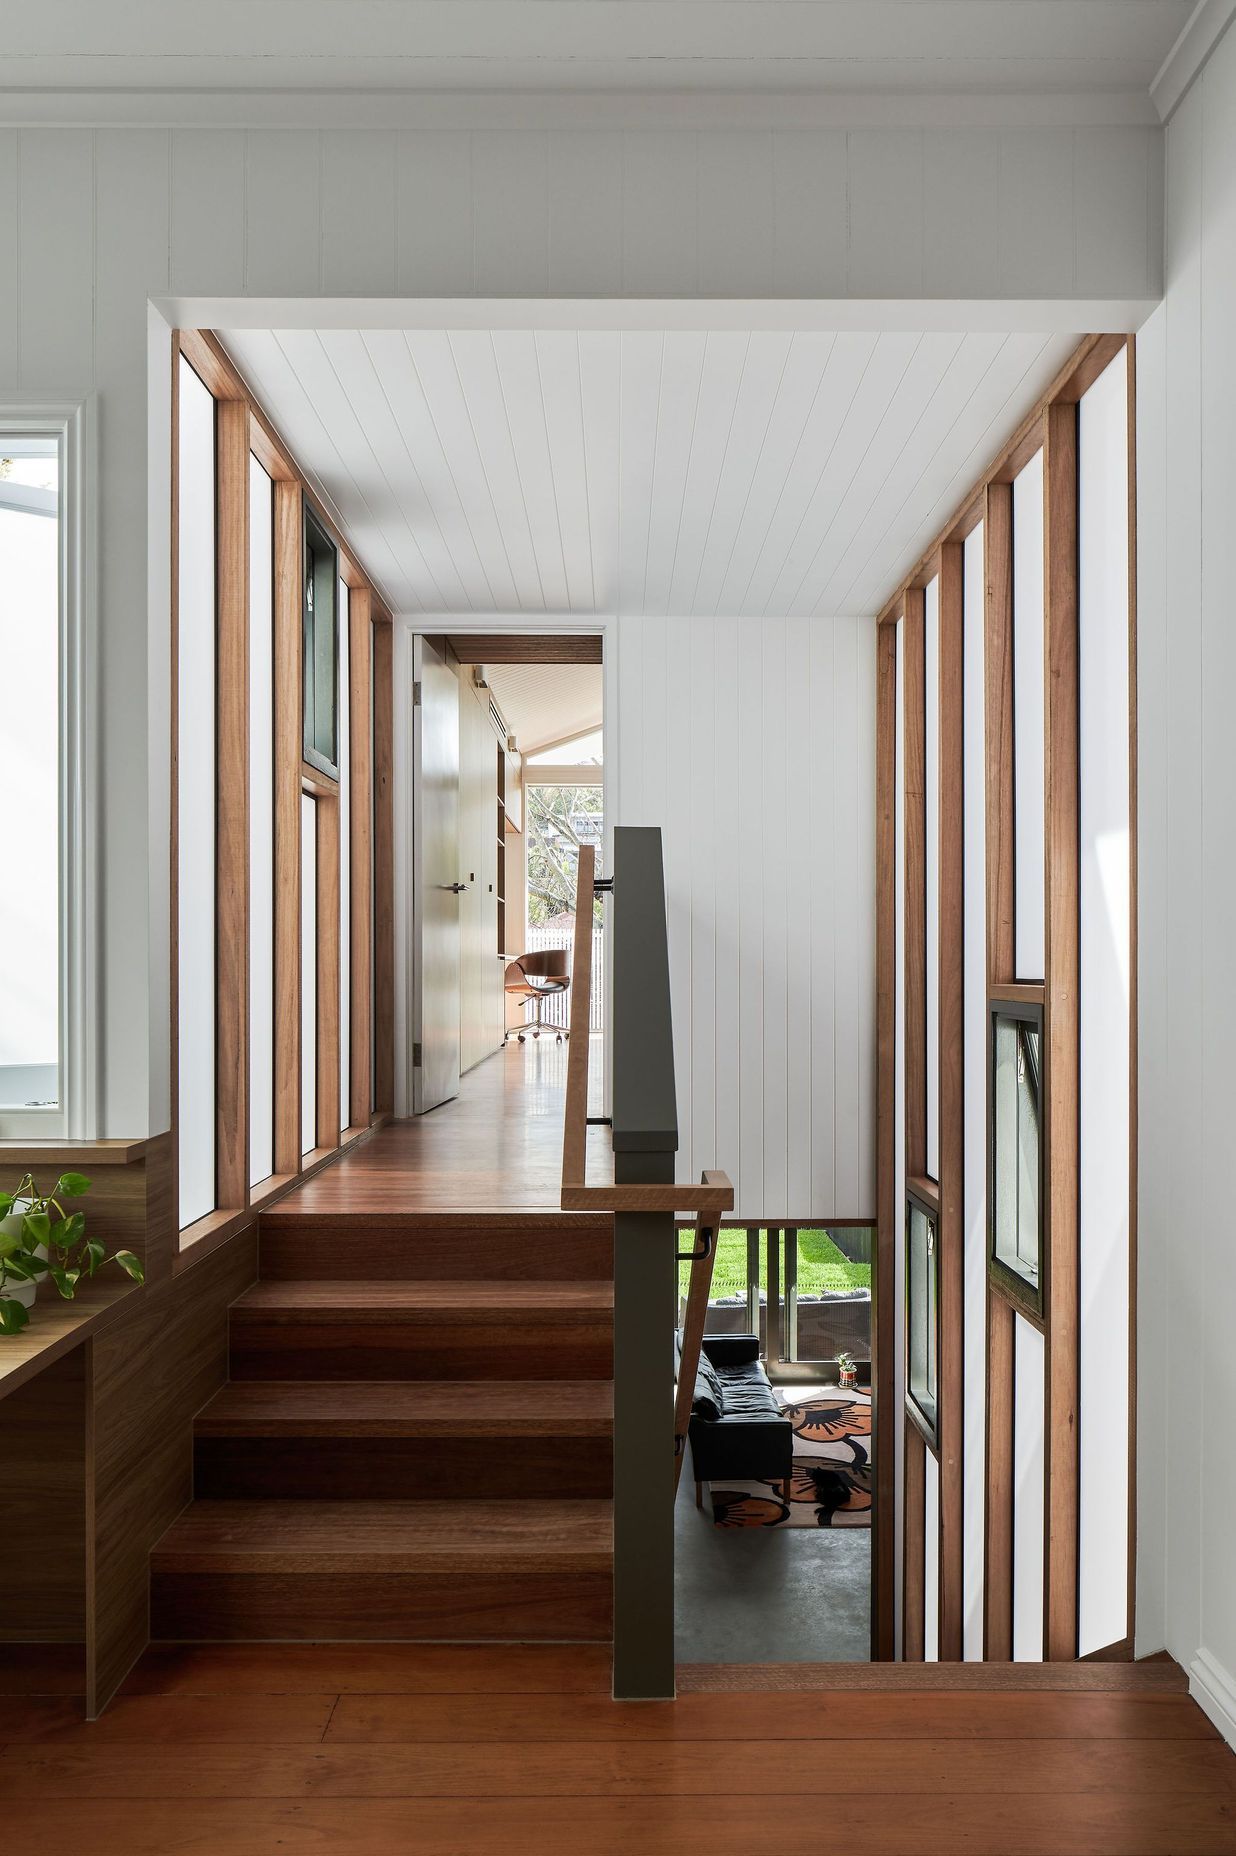 Photography: Andy Macpherson / Alanna Jayne McTiernan | Through this new addition that doubles the volume of the existing cottage, the ground floor now has a direct connection to the backyard